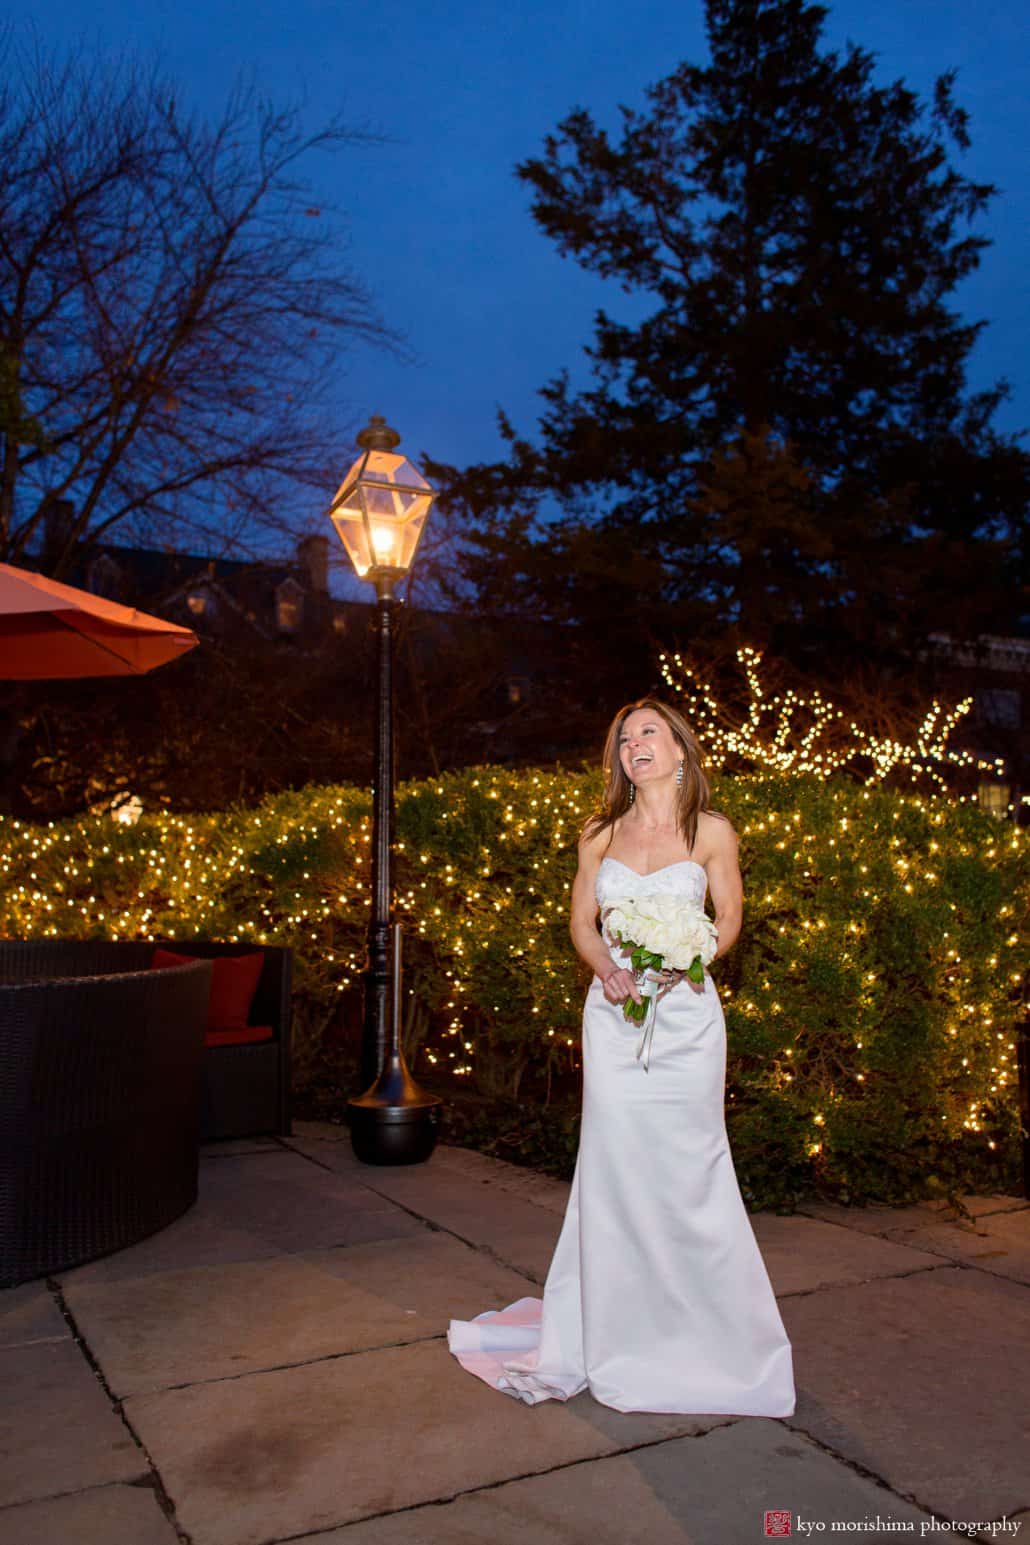 Bride laughs as she poses on Nassau Inn patio during a March evening wedding, photographed by Kyo Morishima